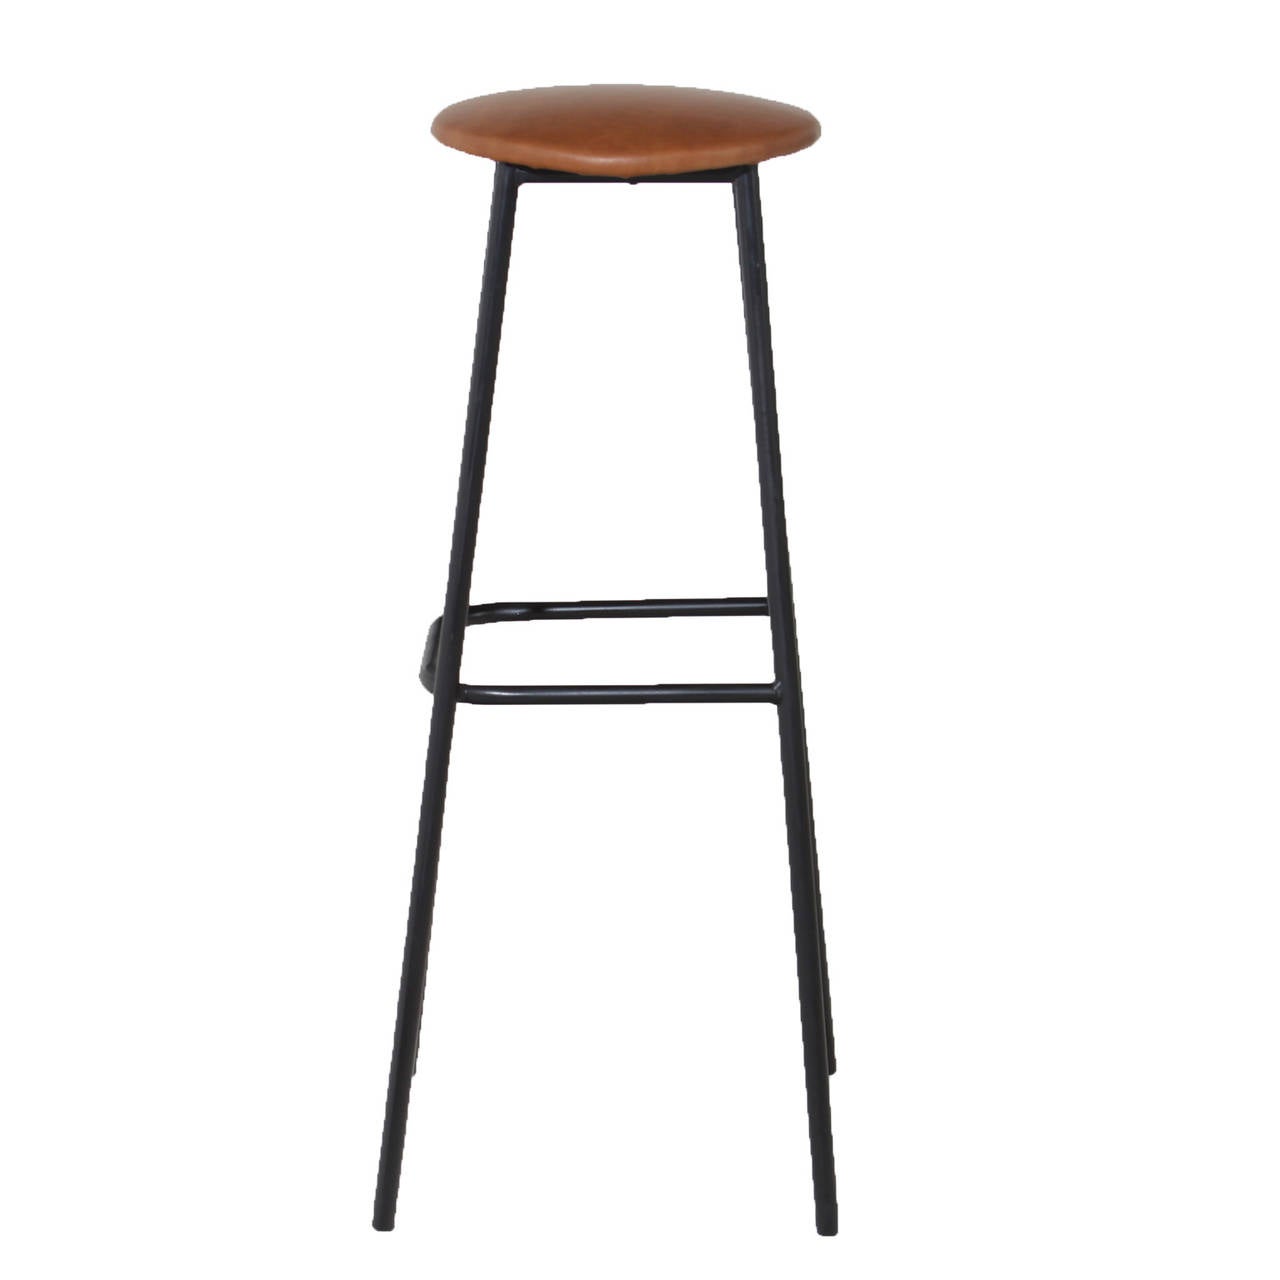 Mid-20th Century Midcentury Iron and Leather Stools with Straight and Splayed Legs For Sale